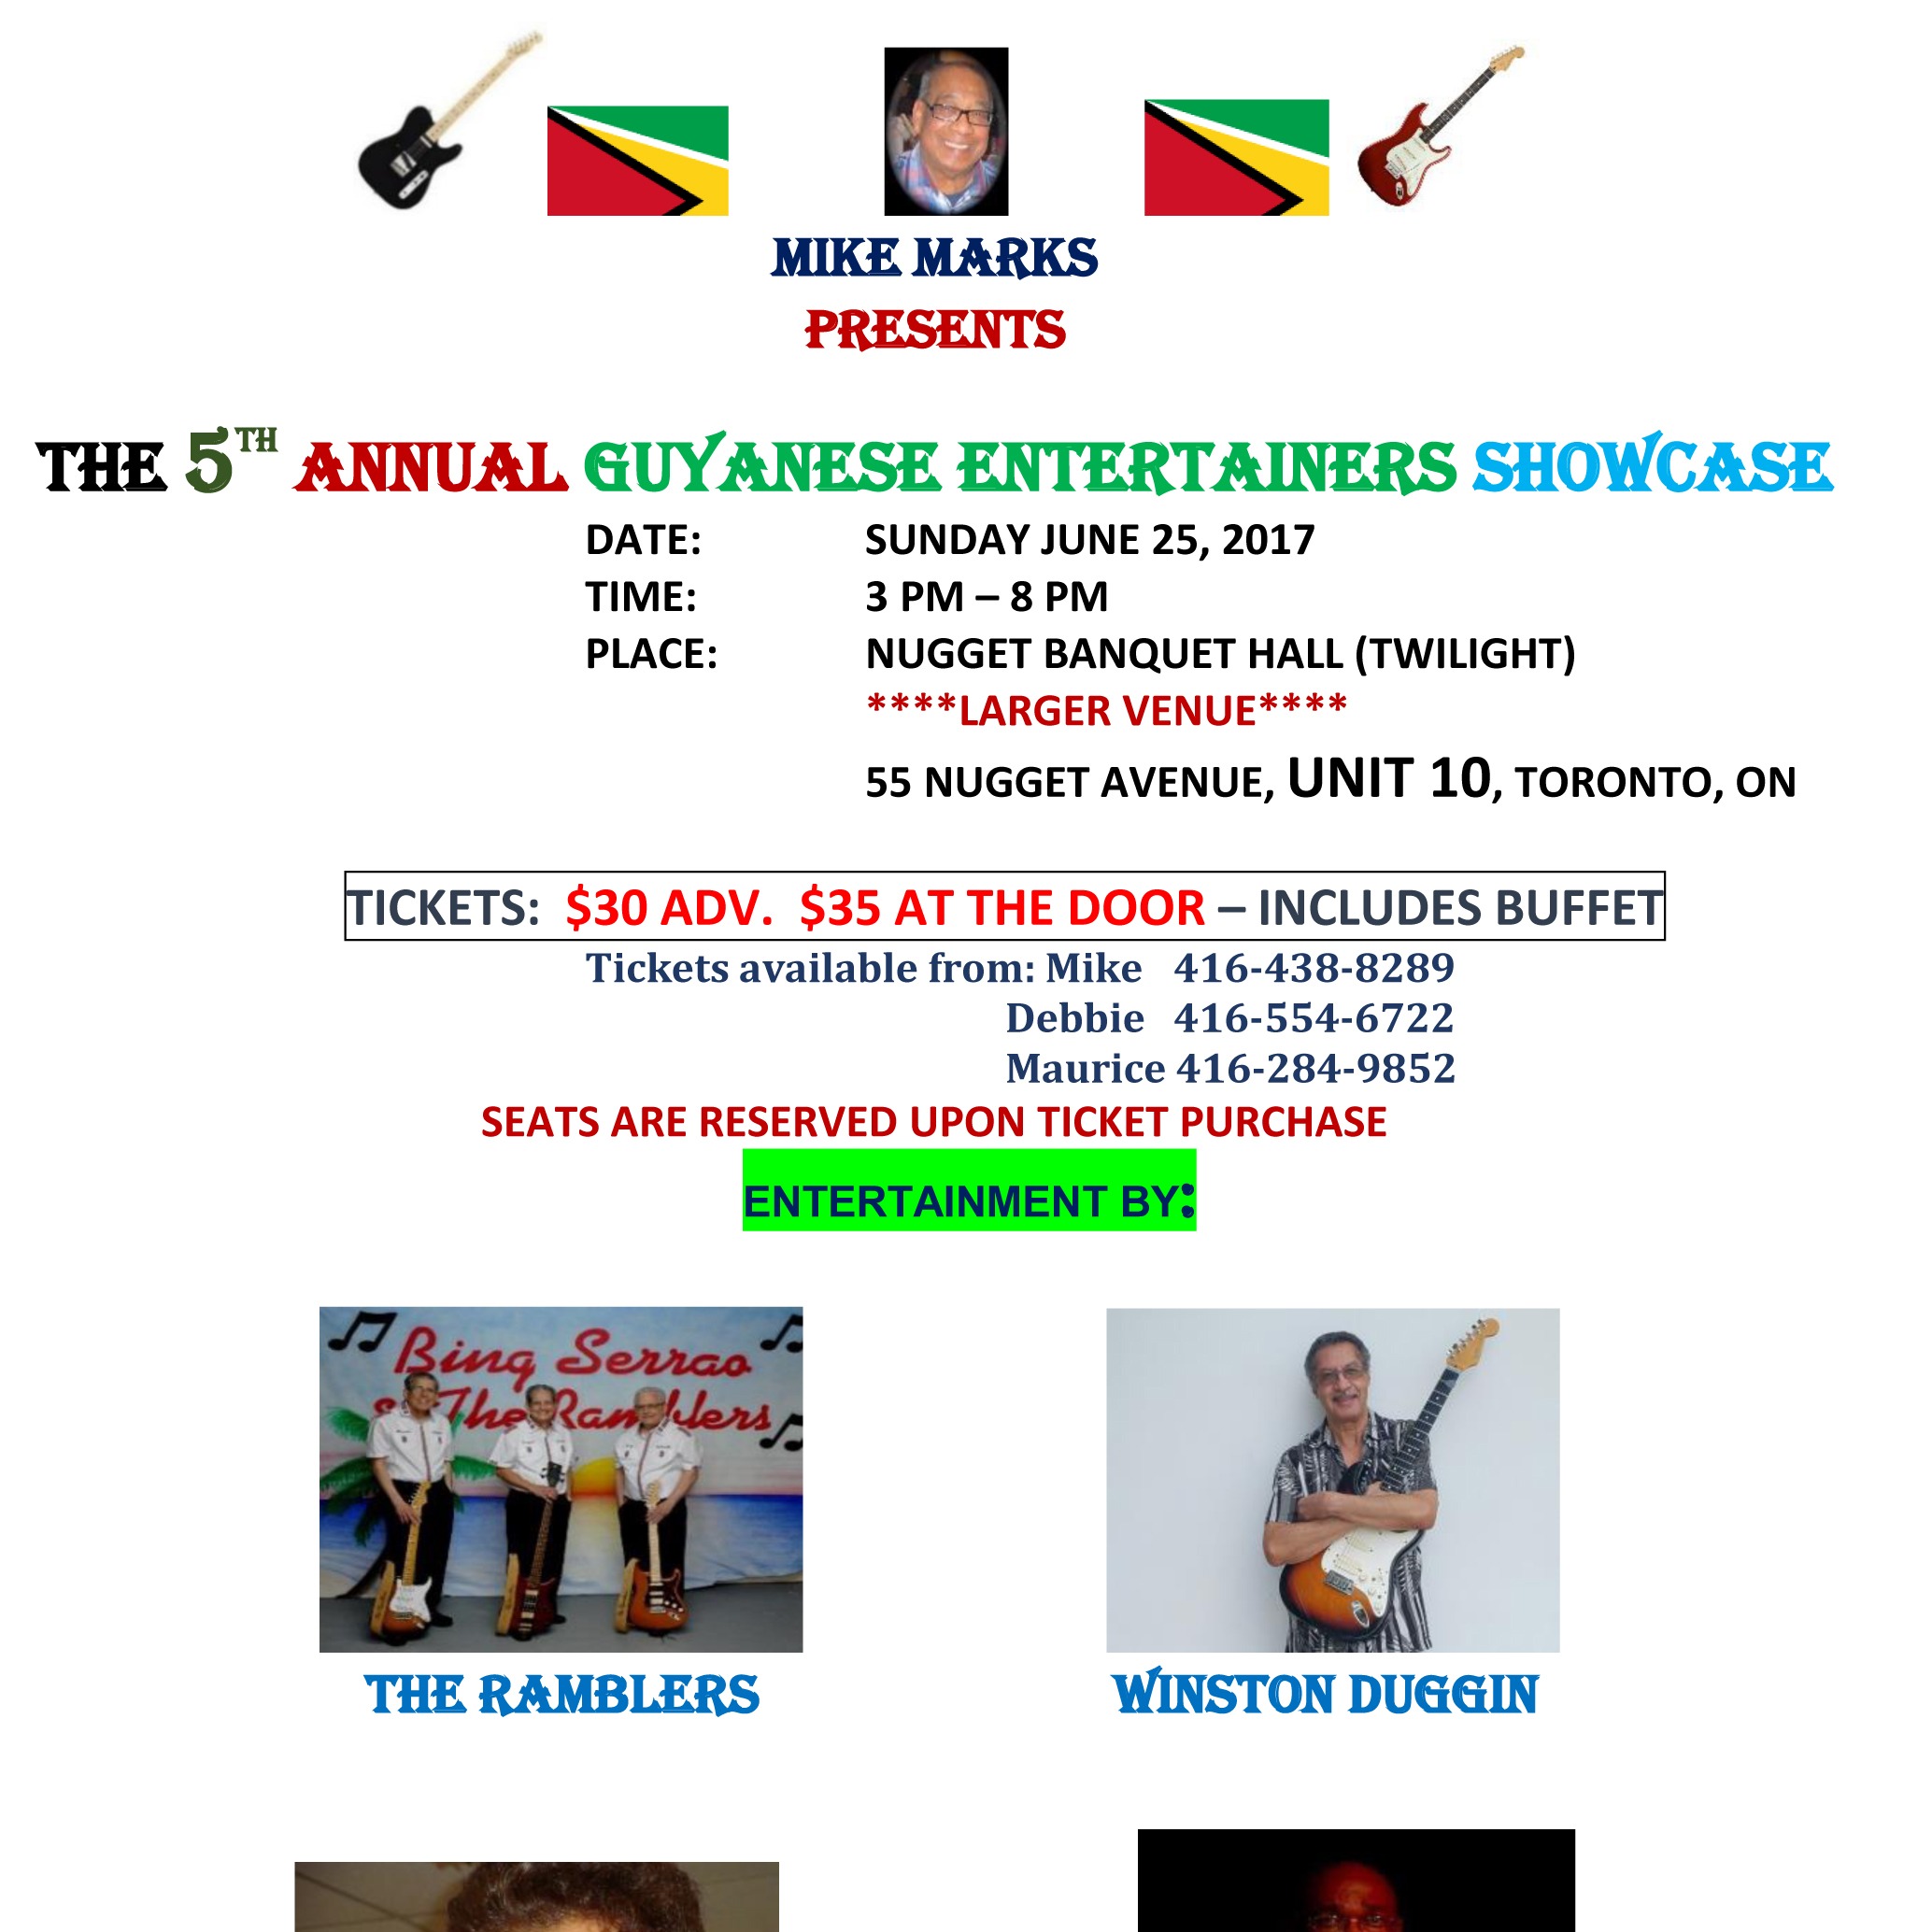 The 5th Annual Guyanese Entertainers Showcase 